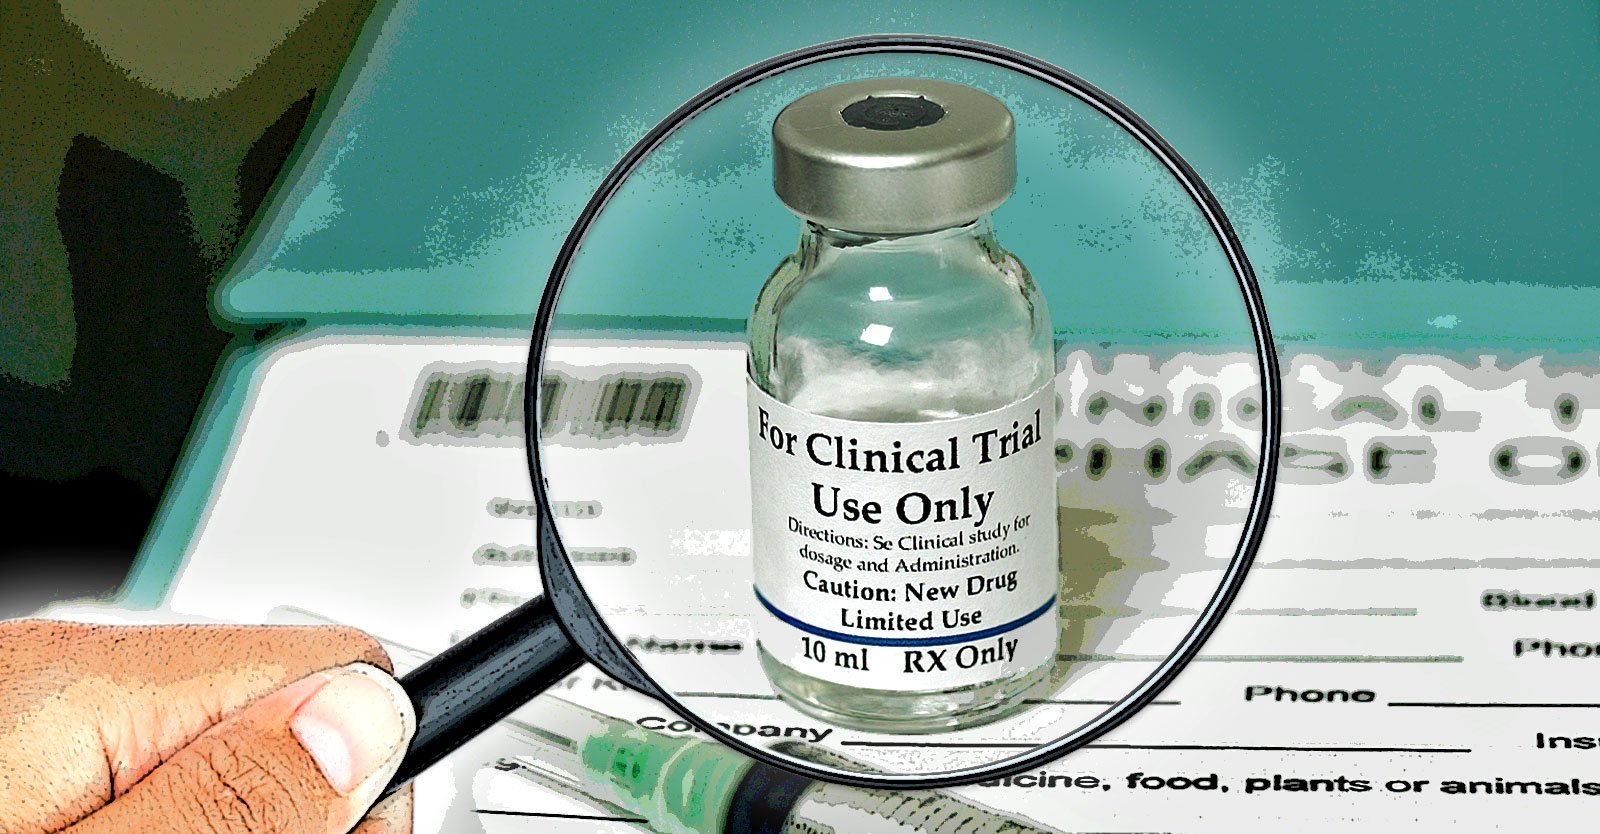 COVID Vaccine Trials Were Biased: How Pfizer, Moderna Exaggerated Shots’ Efficacy